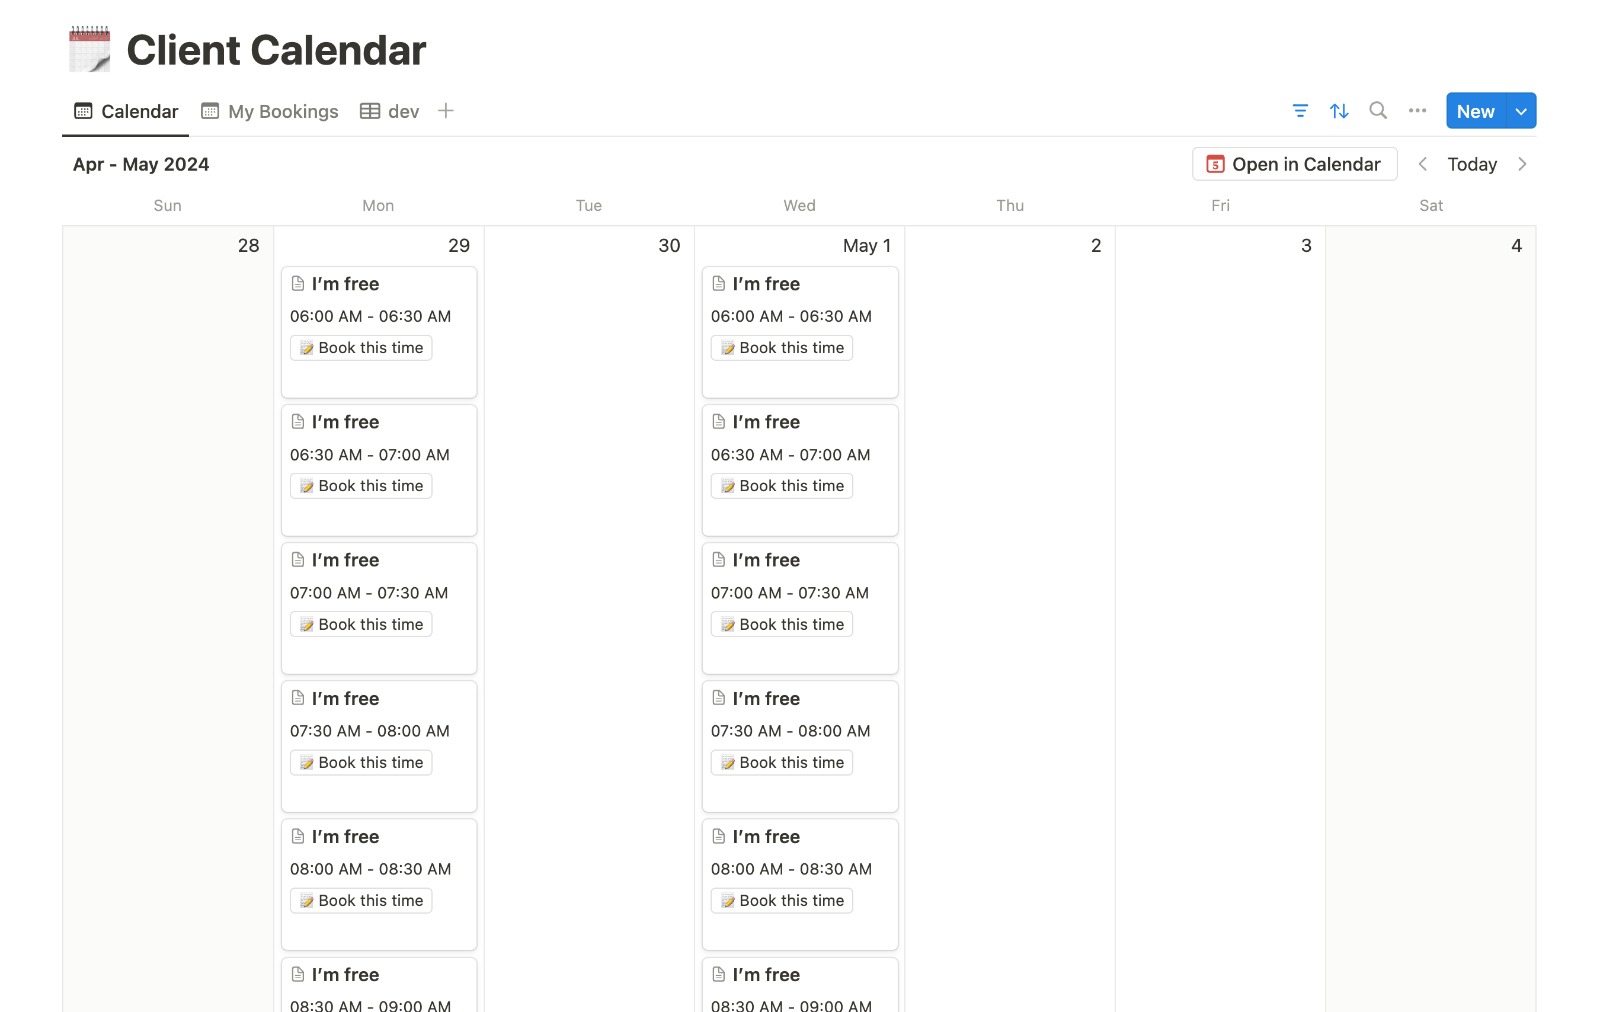 Transform your Notion into a powerful scheduling hub with our template, equivalent to Calendly. Effortlessly allow clients to book meetings directly into your Notion calendar, streamlining your appointment process. It's the ultimate tool for managing your time efficiently.